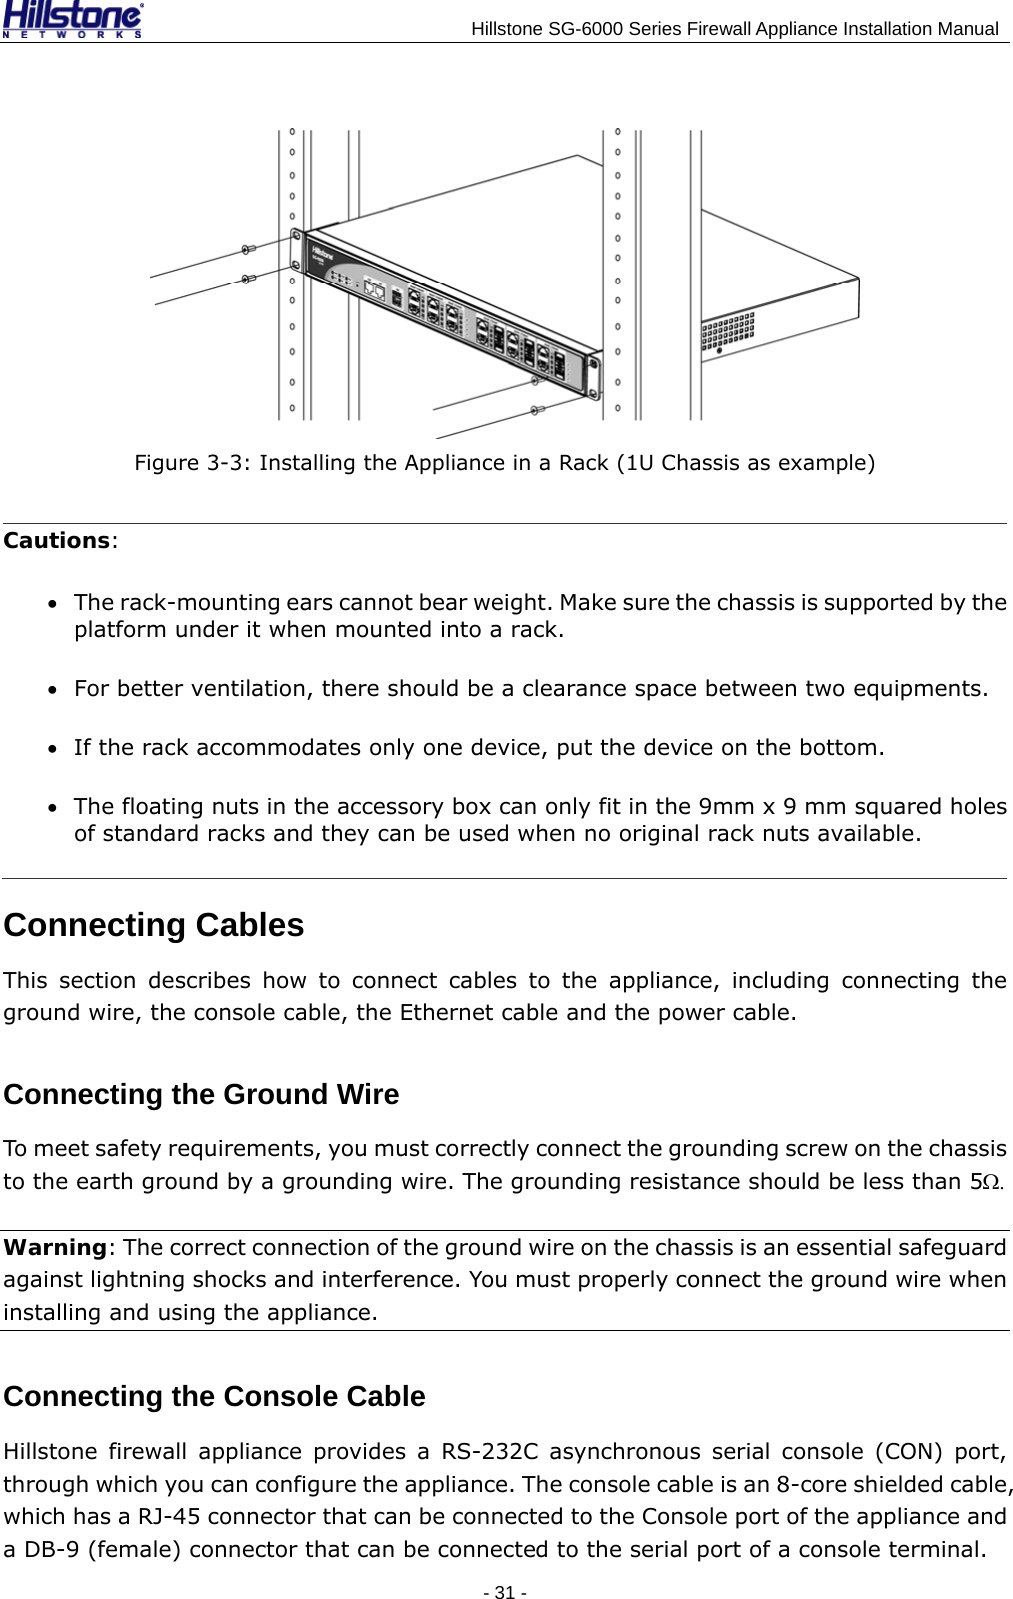                                    Hillstone SG-6000 Series Firewall Appliance Installation Manual  Figure 3-3: Installing the Appliance in a Rack (1U Chassis as example) Cautions: • The rack-mounting ears cannot bear weight. Make sure the chassis is supported by the platform under it when mounted into a rack. • For better ventilation, there should be a clearance space between two equipments. • If the rack accommodates only one device, put the device on the bottom. • The floating nuts in the accessory box can only fit in the 9mm x 9 mm squared holes of standard racks and they can be used when no original rack nuts available. Connecting Cables This section describes how to connect cables to the appliance, including connecting the ground wire, the console cable, the Ethernet cable and the power cable. Connecting the Ground Wire To meet safety requirements, you must correctly connect the grounding screw on the chassis to the earth ground by a grounding wire. The grounding resistance should be less than 5Ω. Warning: The correct connection of the ground wire on the chassis is an essential safeguard against lightning shocks and interference. You must properly connect the ground wire when installing and using the appliance. Connecting the Console Cable Hillstone firewall appliance provides a RS-232C asynchronous serial console (CON) port, through which you can configure the appliance. The console cable is an 8-core shielded cable, which has a RJ-45 connector that can be connected to the Console port of the appliance and a DB-9 (female) connector that can be connected to the serial port of a console terminal. - 31 -  